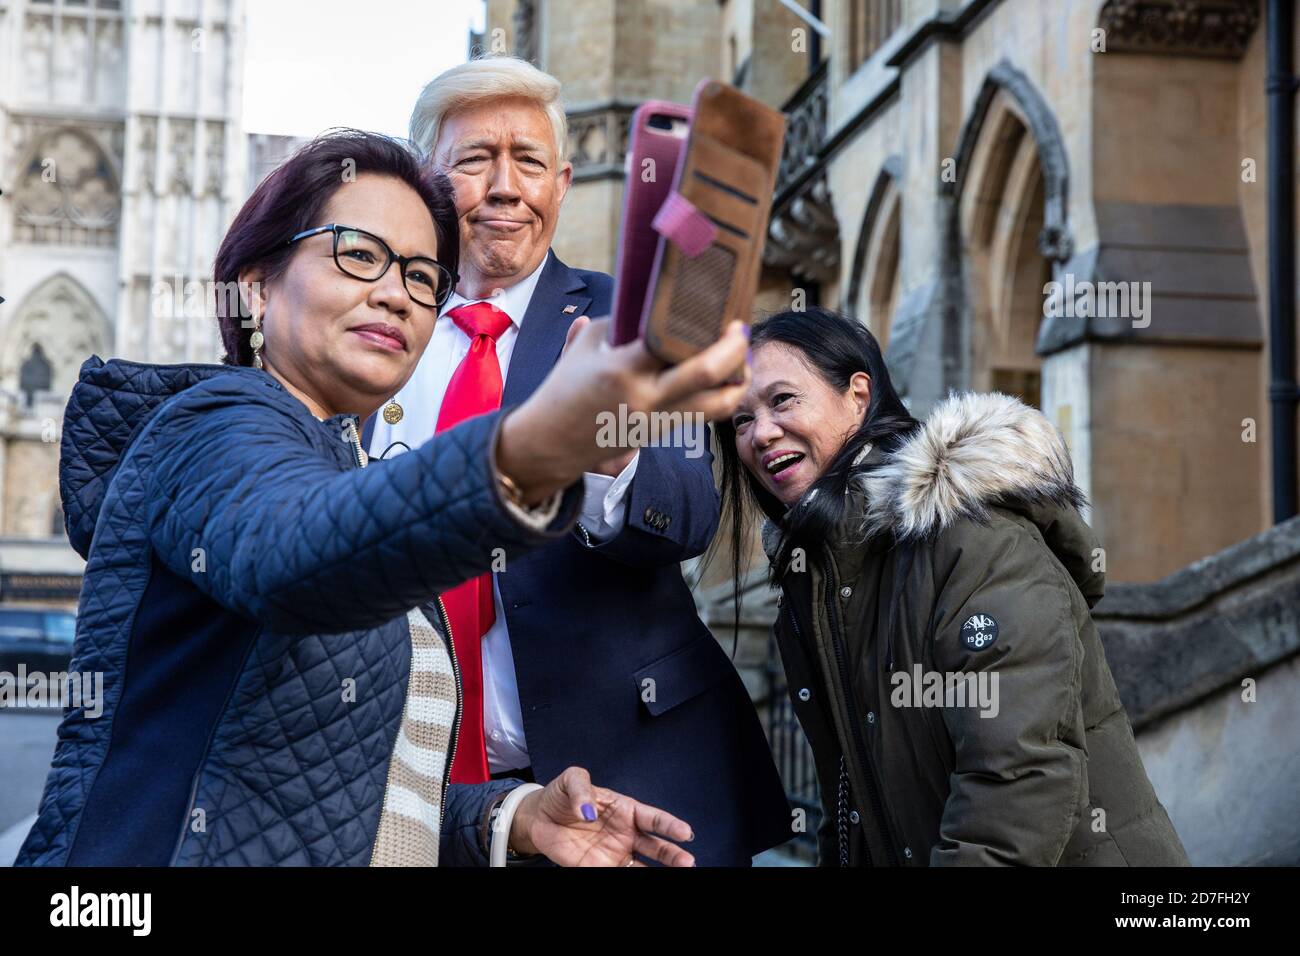 London, UK. 22nd Oct 2020. London, UK. 22nd Oct 2020. Donald Trump, President of the United States of America (look-a-like) drops into Parliament Square, London, England, UK Credit: Jeff Gilbert/Alamy Live News Stock Photo